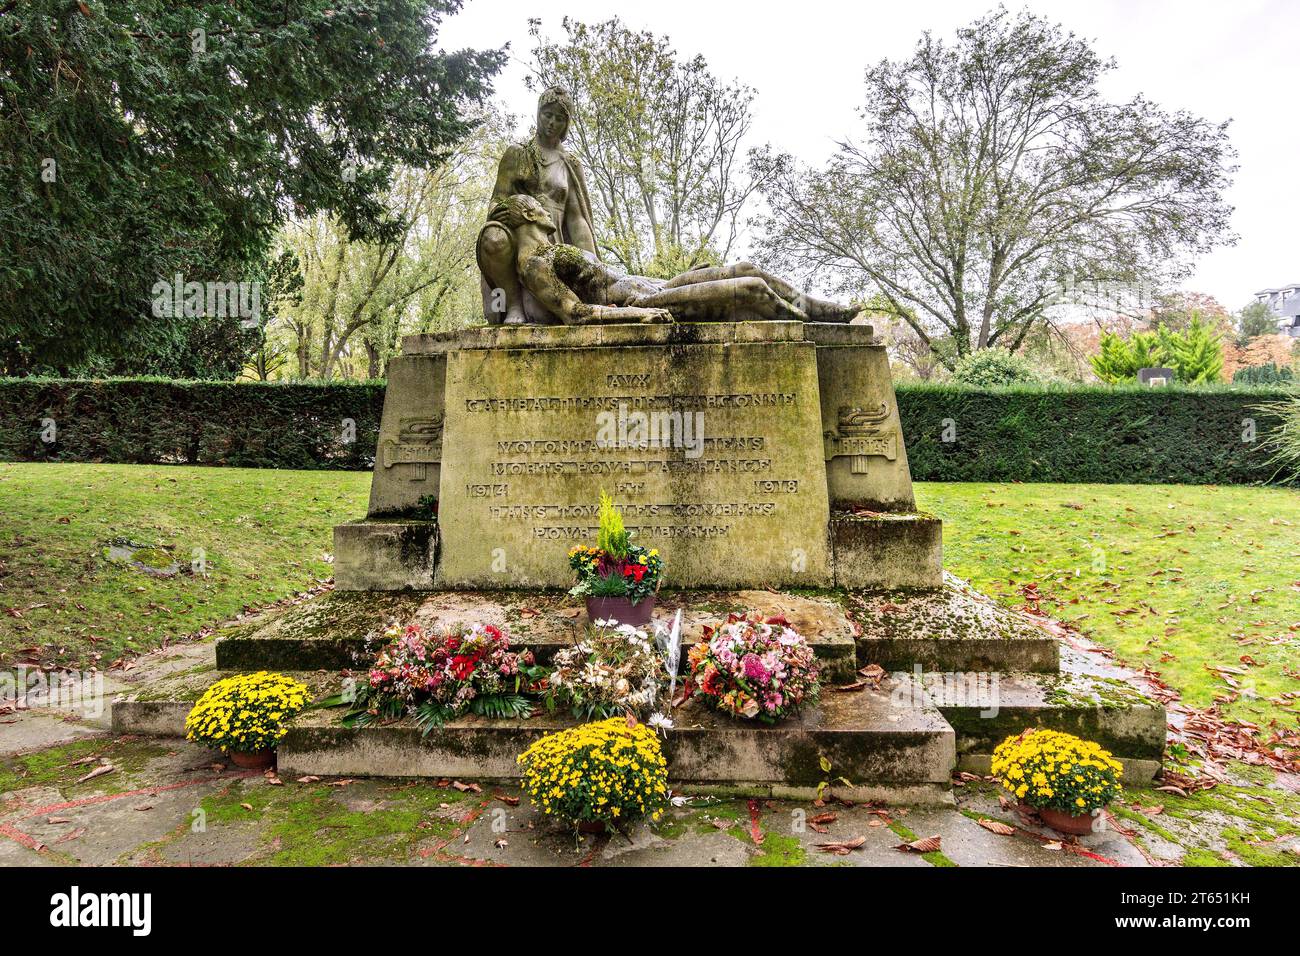 Monument to Italian soldiers dead during WW1, in the Père Lachaise cemetery, Paris 20, France. Stock Photo